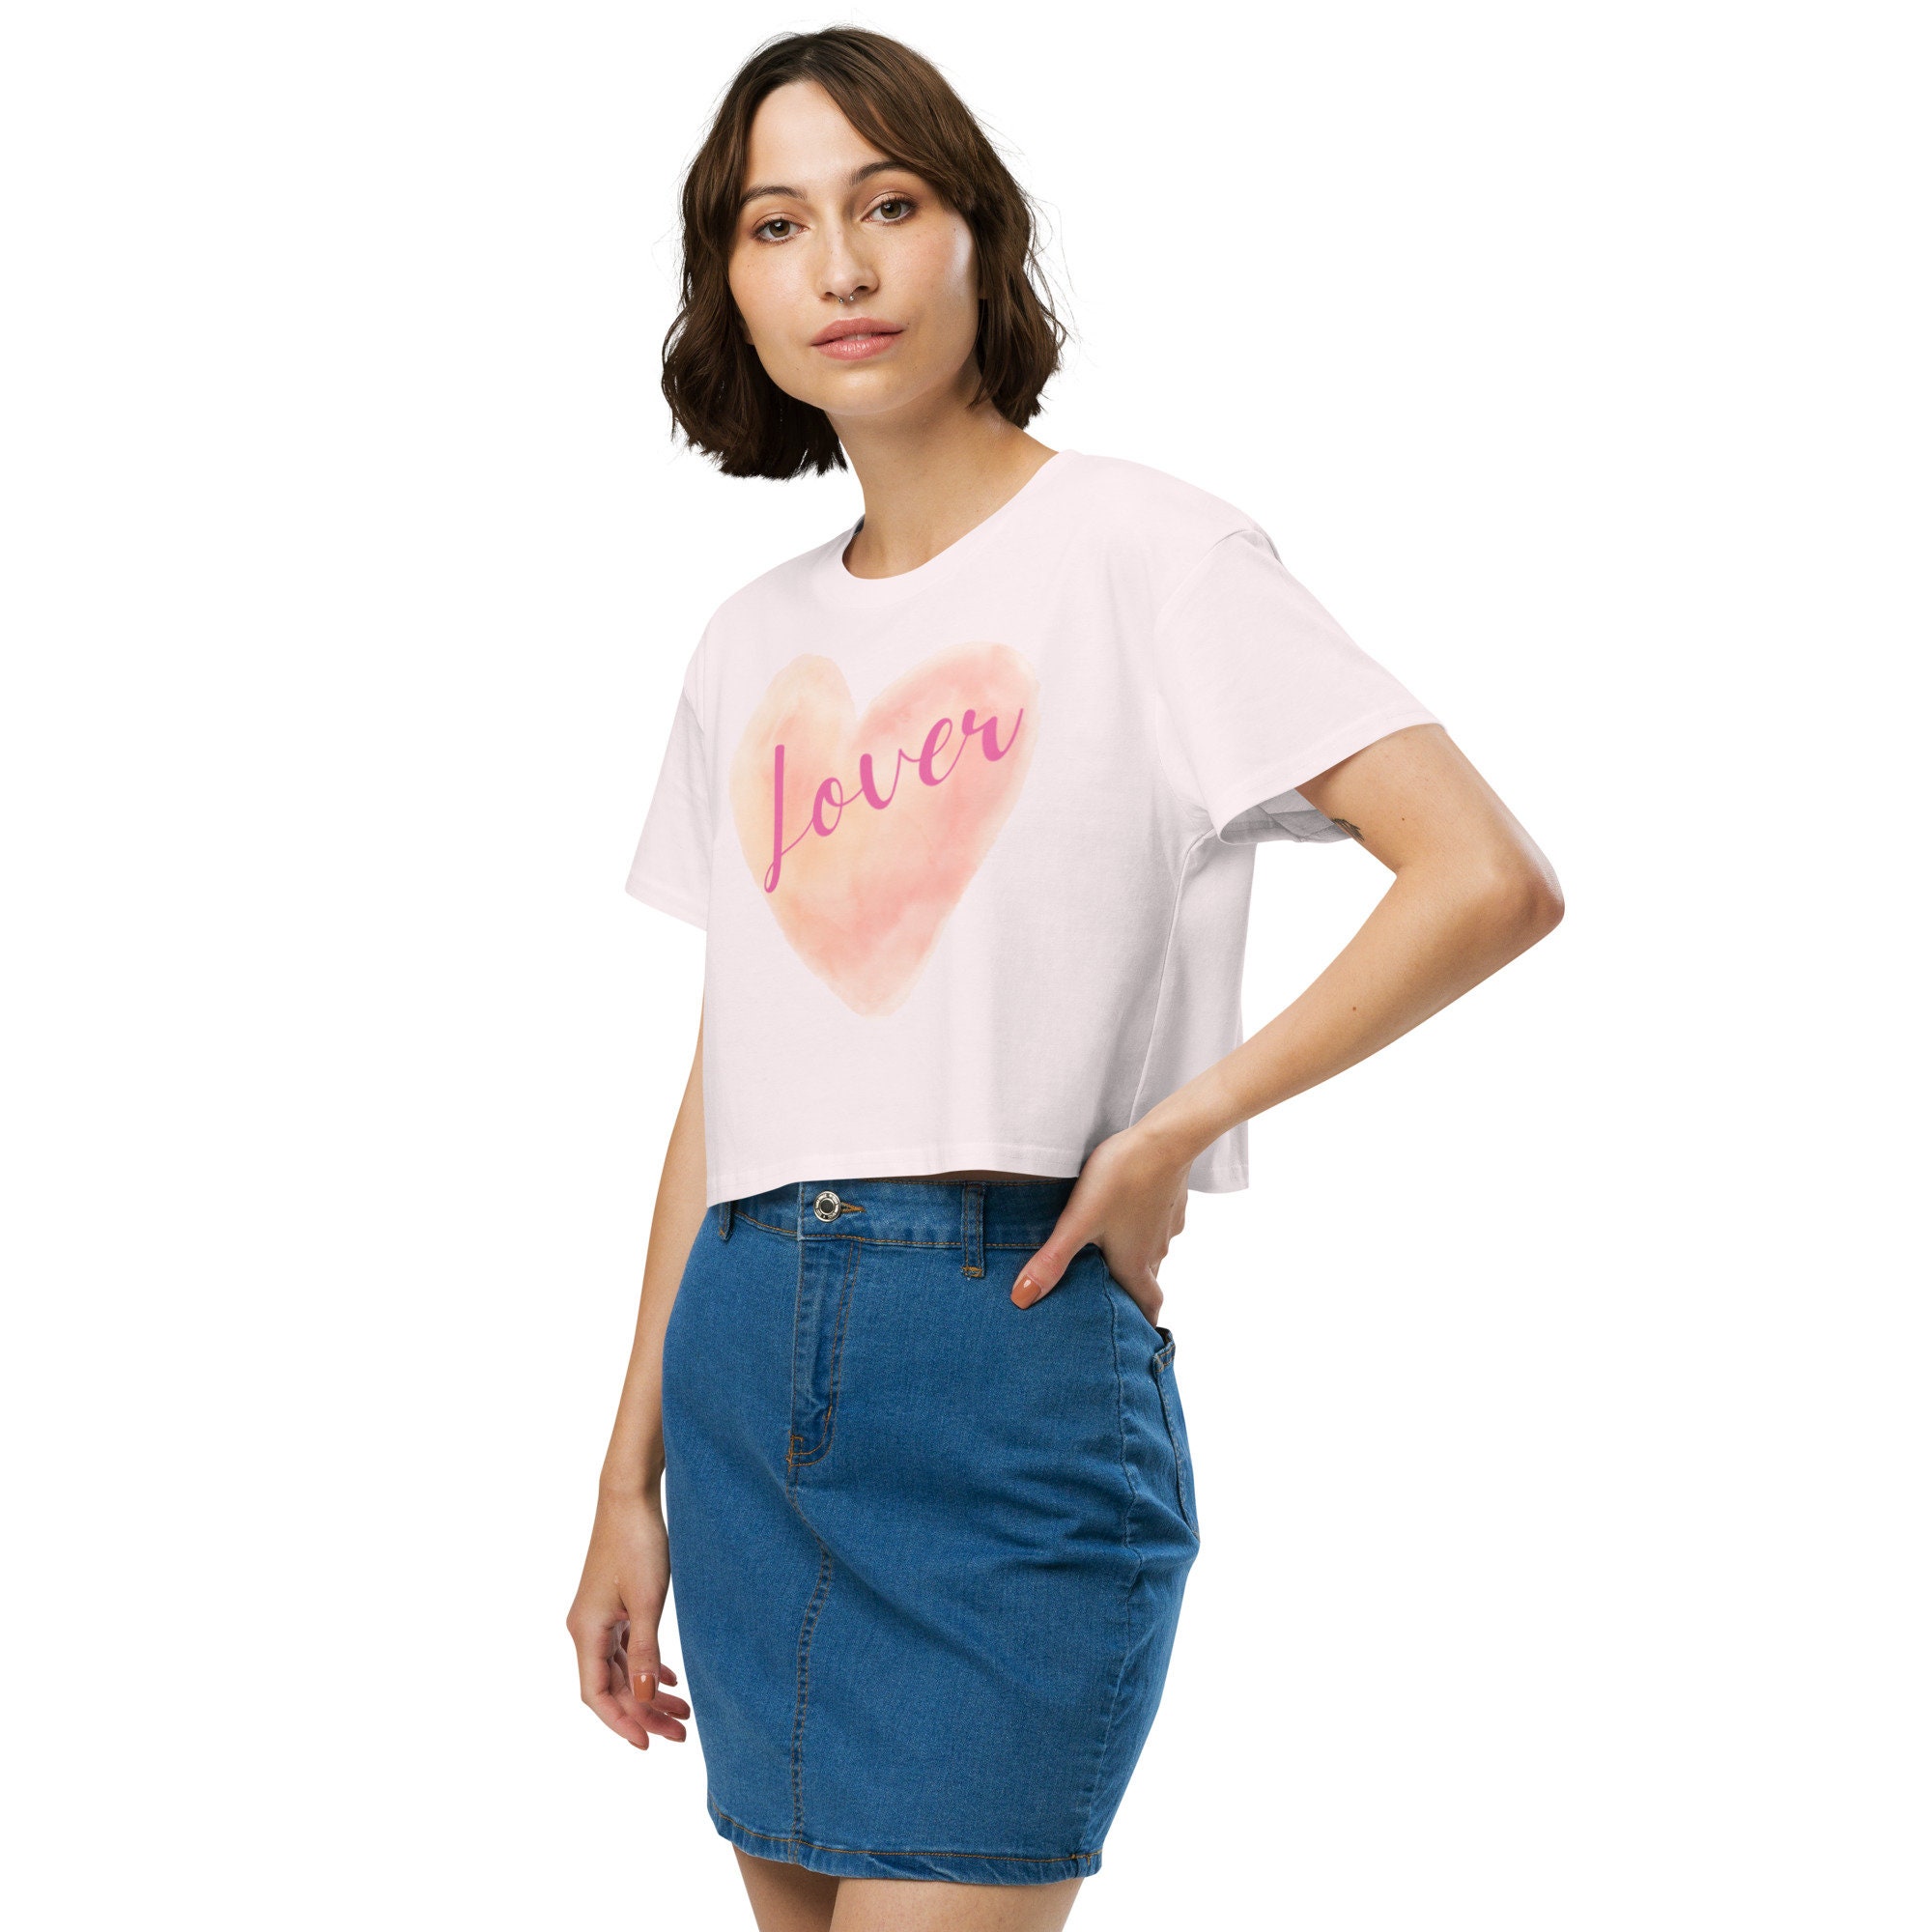 Lover Taylor Crop Top Shirt, Taylor Flowy Cropped Tee